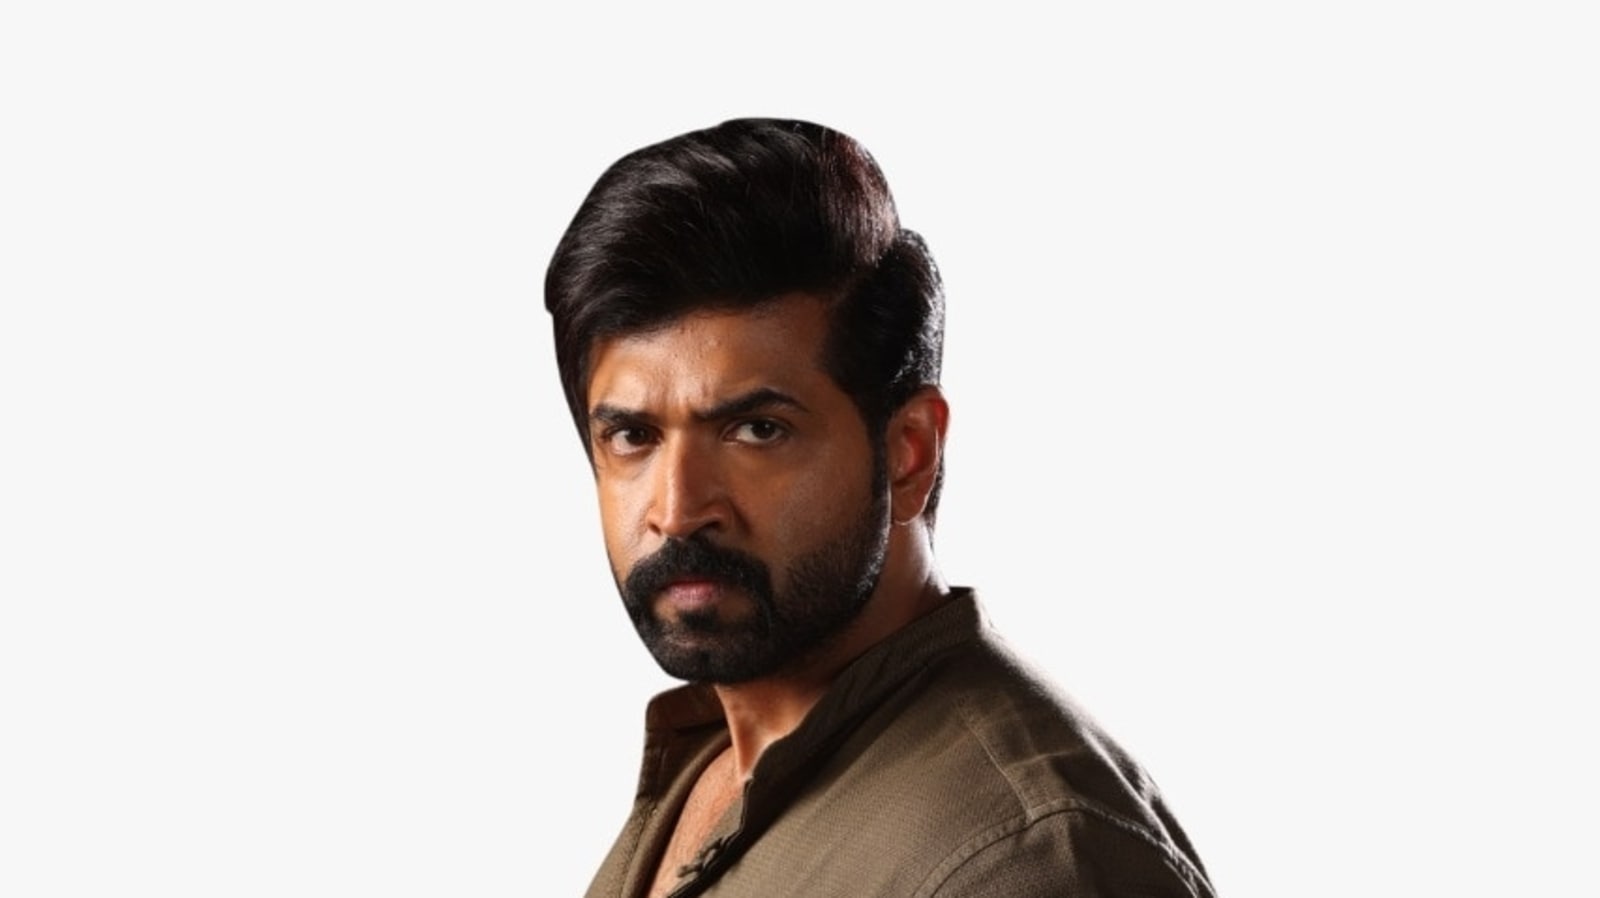 Tamil Rockerz star Arun Vijay says he has seen ‘people losing their lives’ after their films leaked